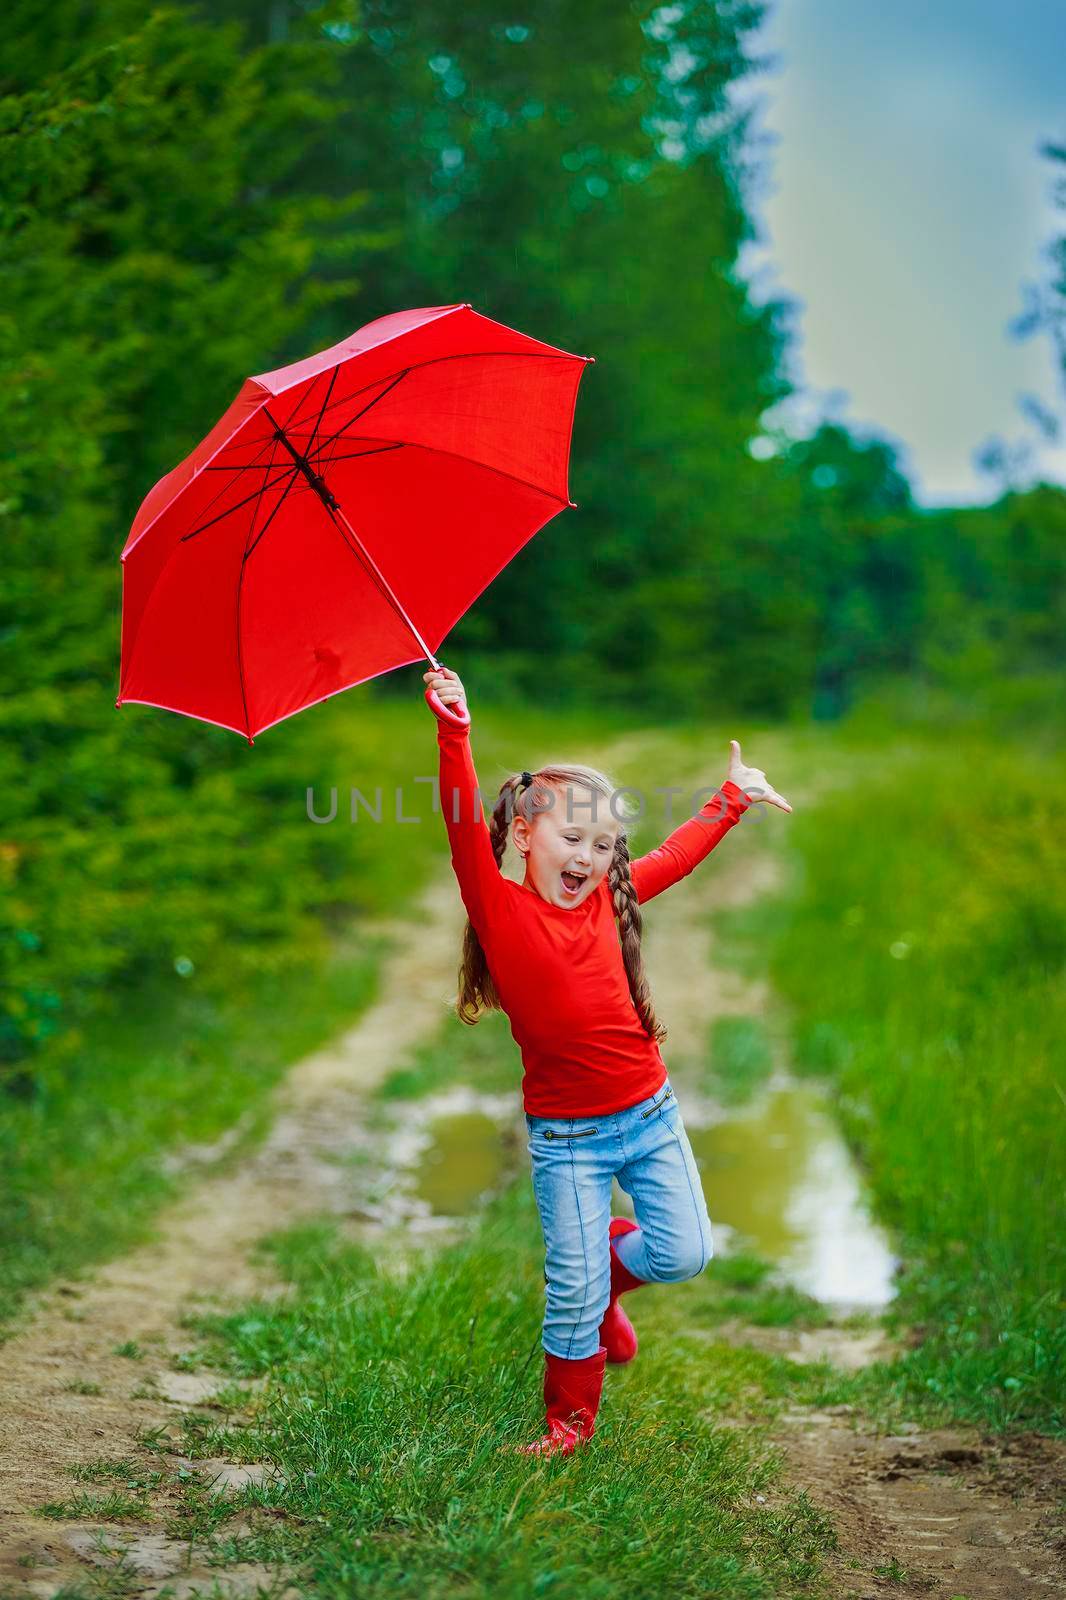 girl with a red umbrella walking on a dirt road